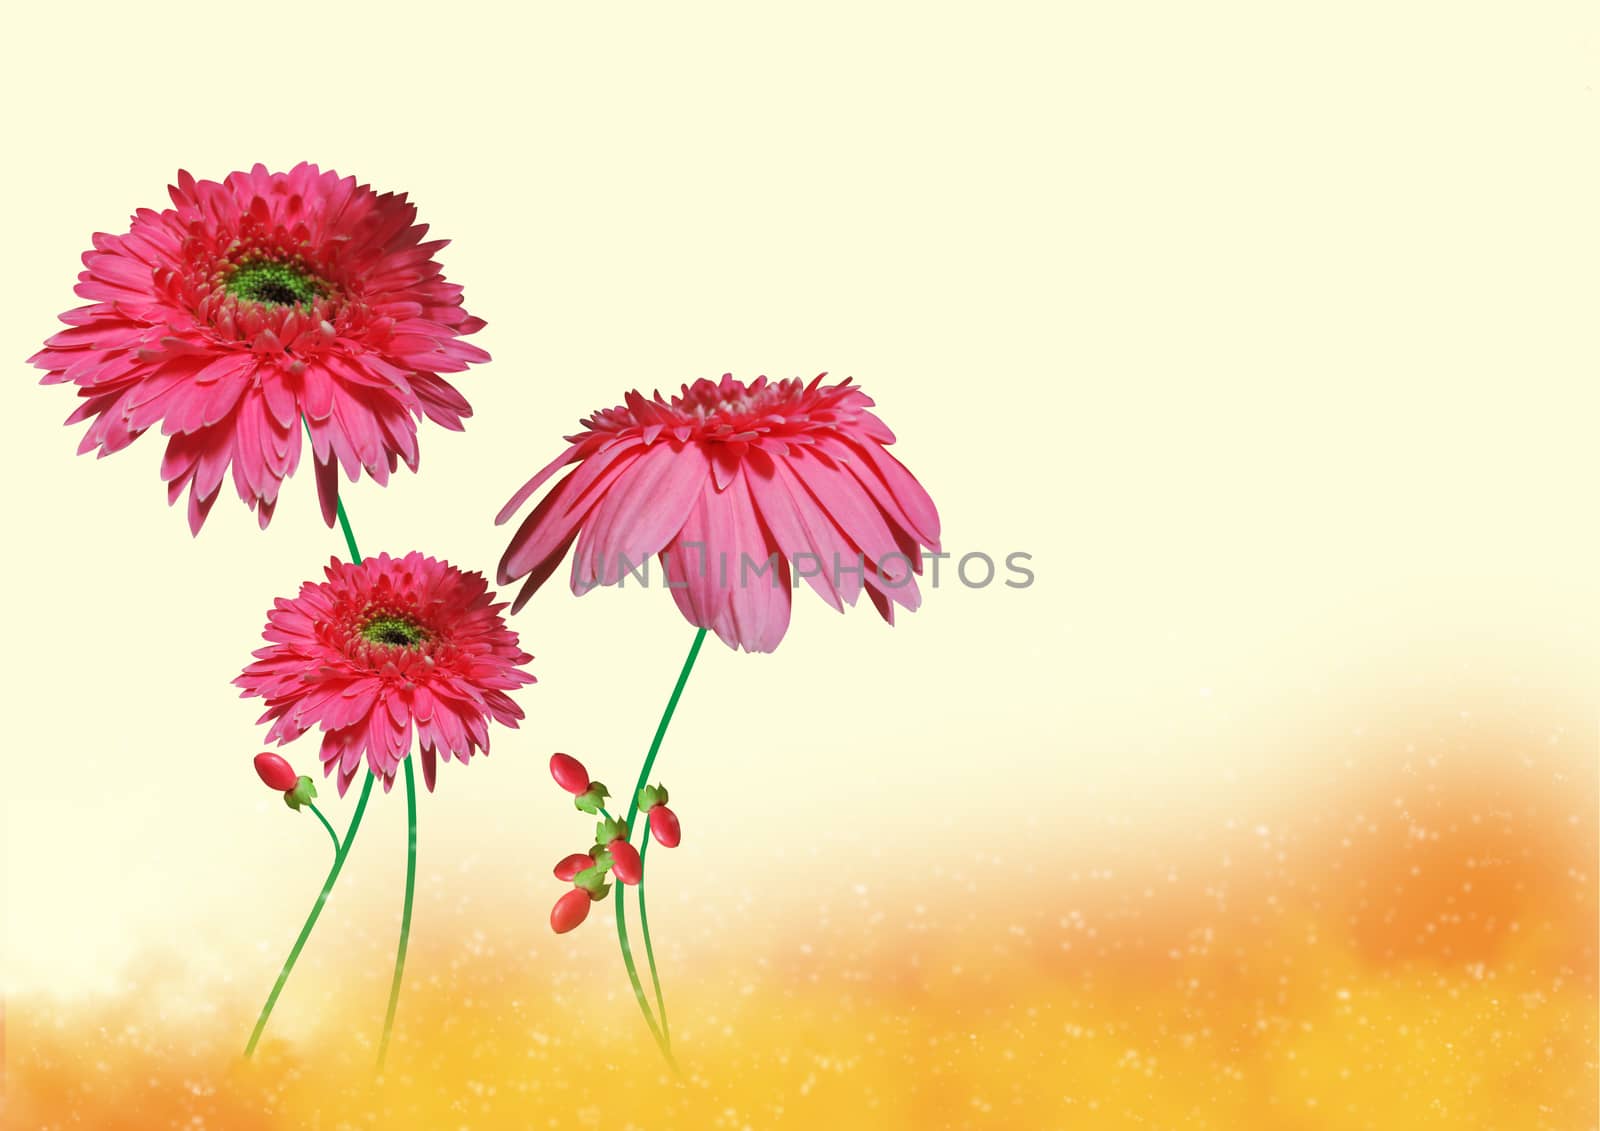 Flowers background by grace21